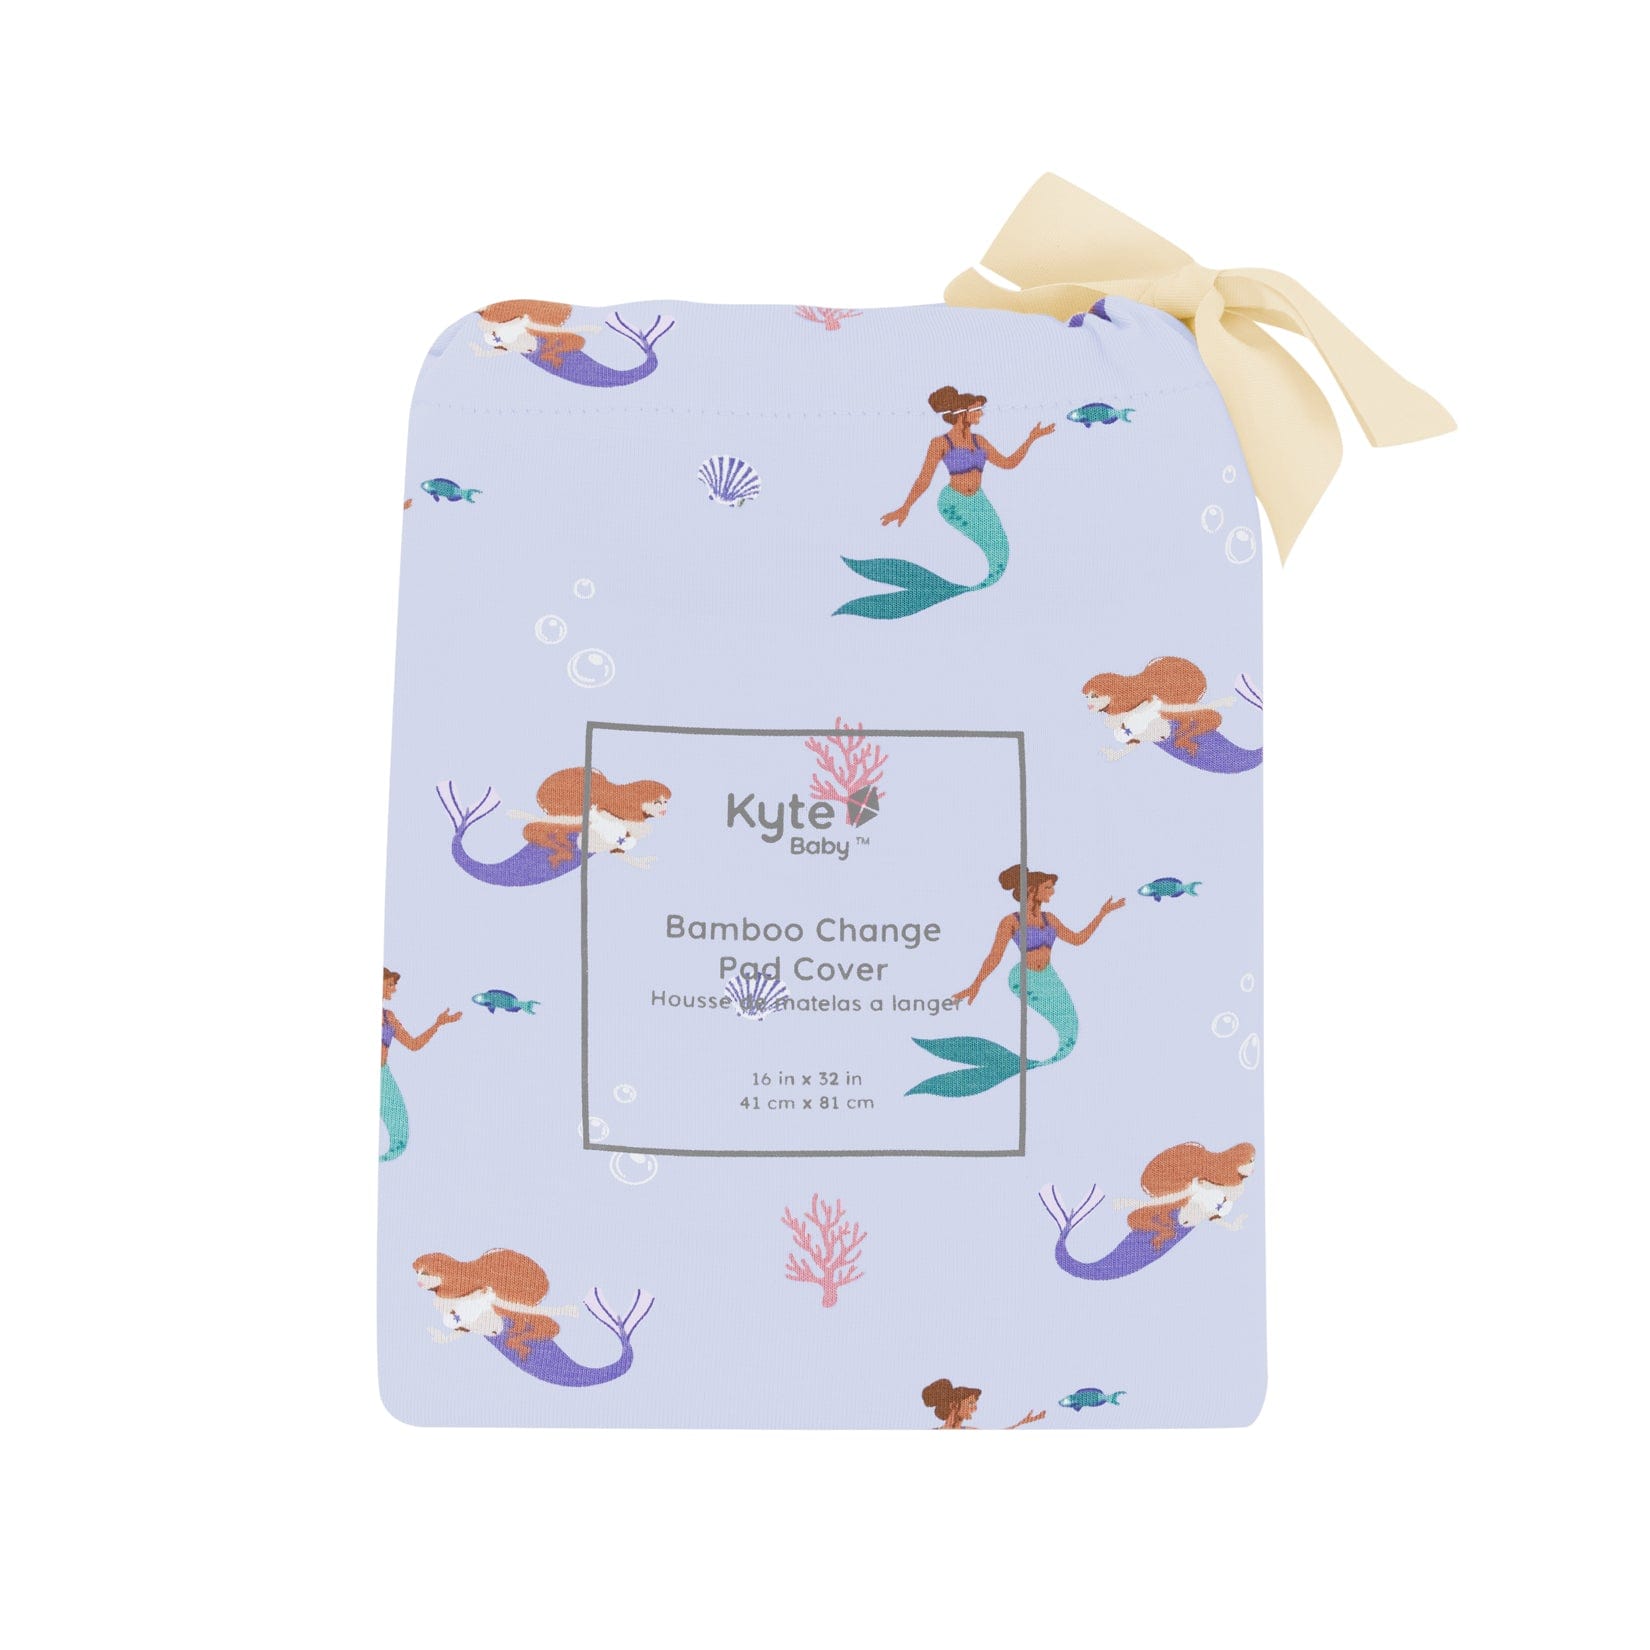 Kyte Baby Change Pad Cover Mermaid / One Size Change Pad Cover in Mermaid